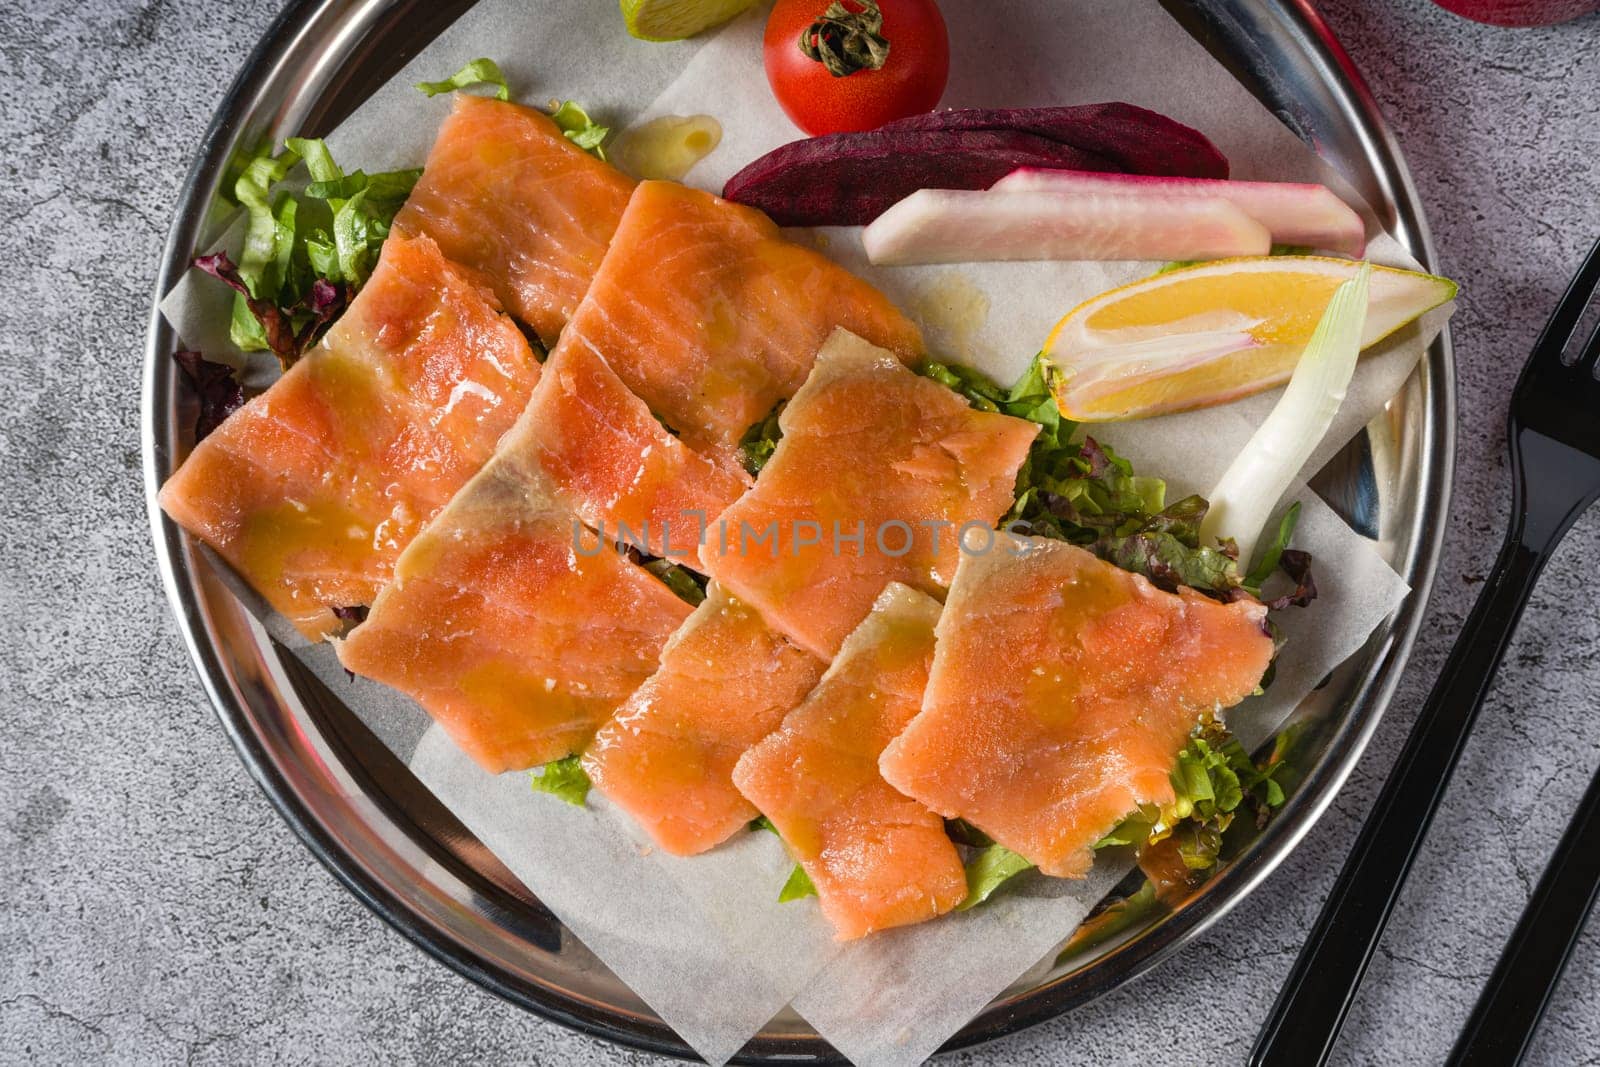 Smoked salmon with greens under it on a stone table by Sonat